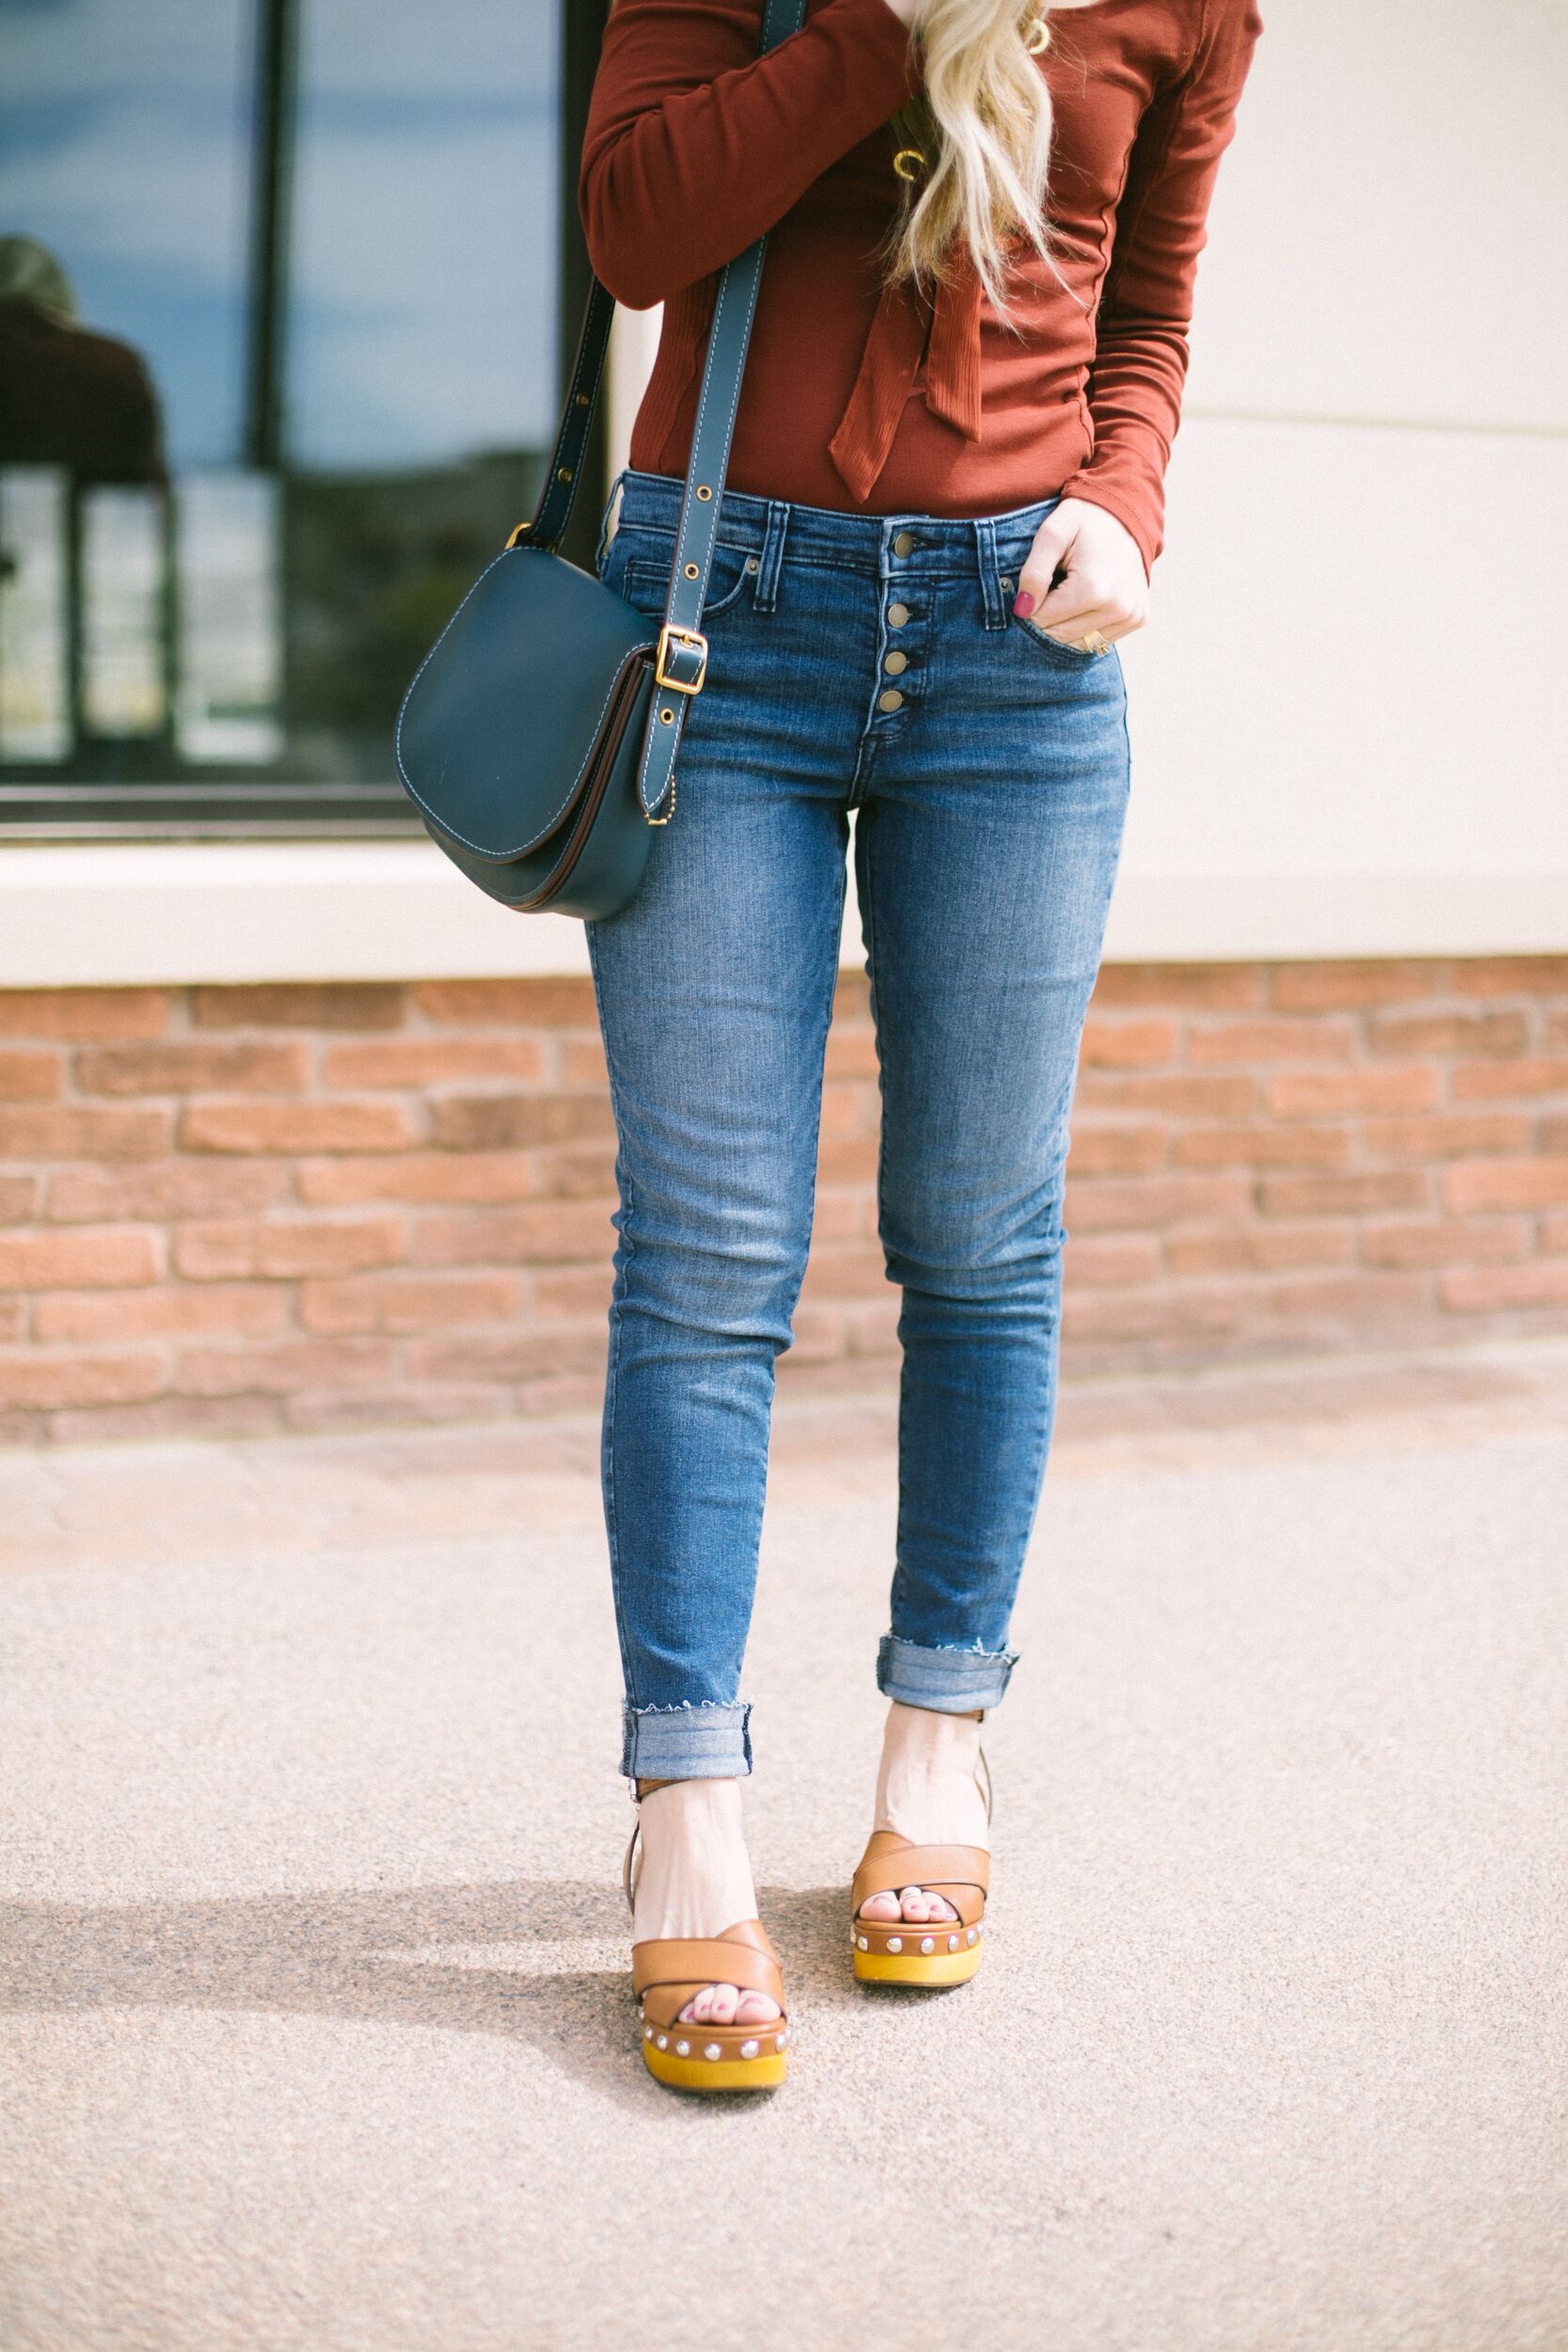 How to Find the Perfect Pair of Jeans by popular Las Vegas fashion bloggers Life of a Sister